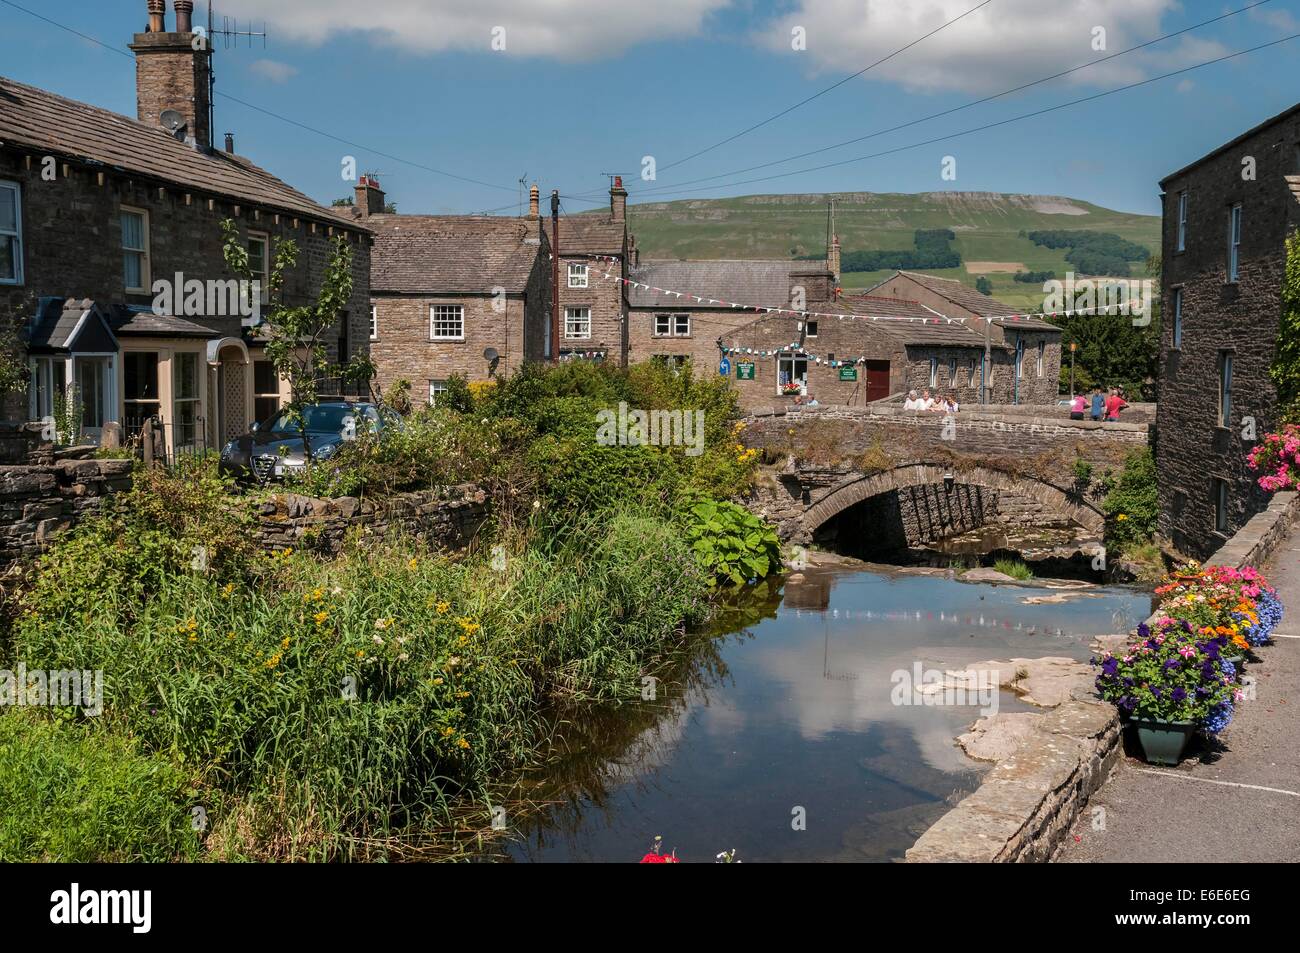 Hawes, North Yorkshire. England. Gayle Beck. Stockfoto